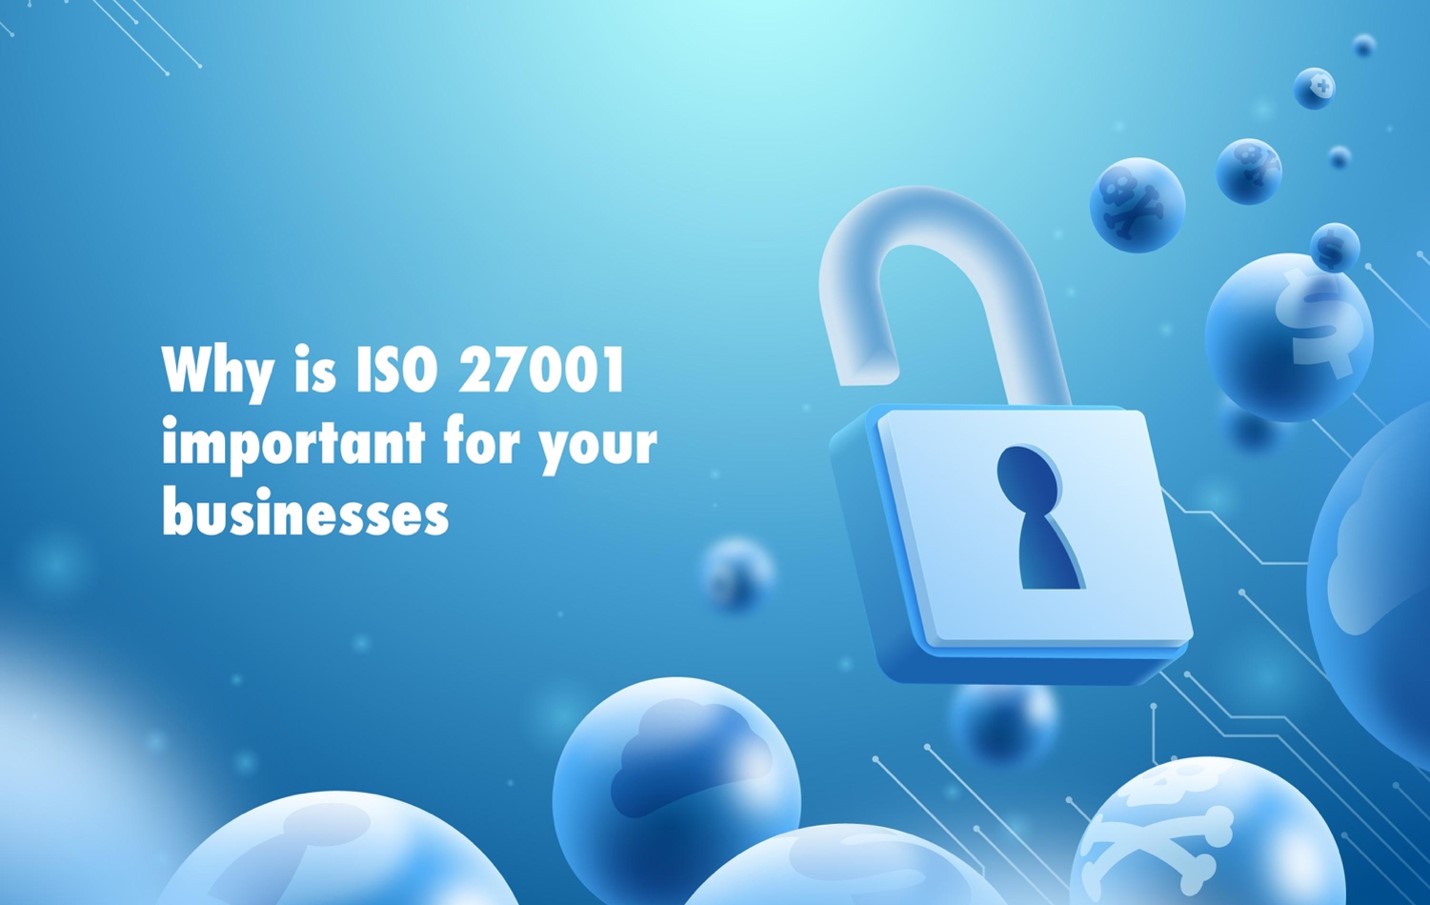 Why is ISO 27001 important for your business?